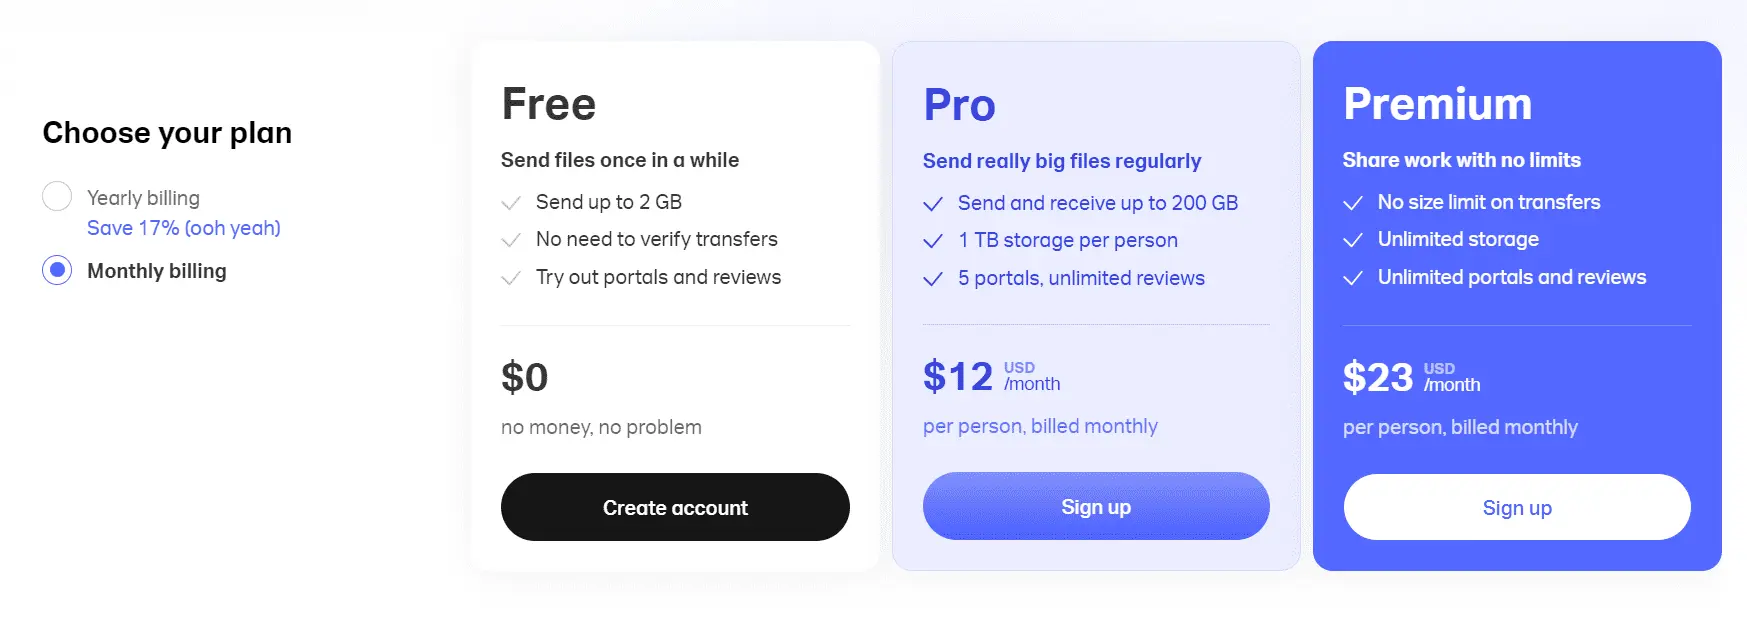 WeTransfer pricing plans